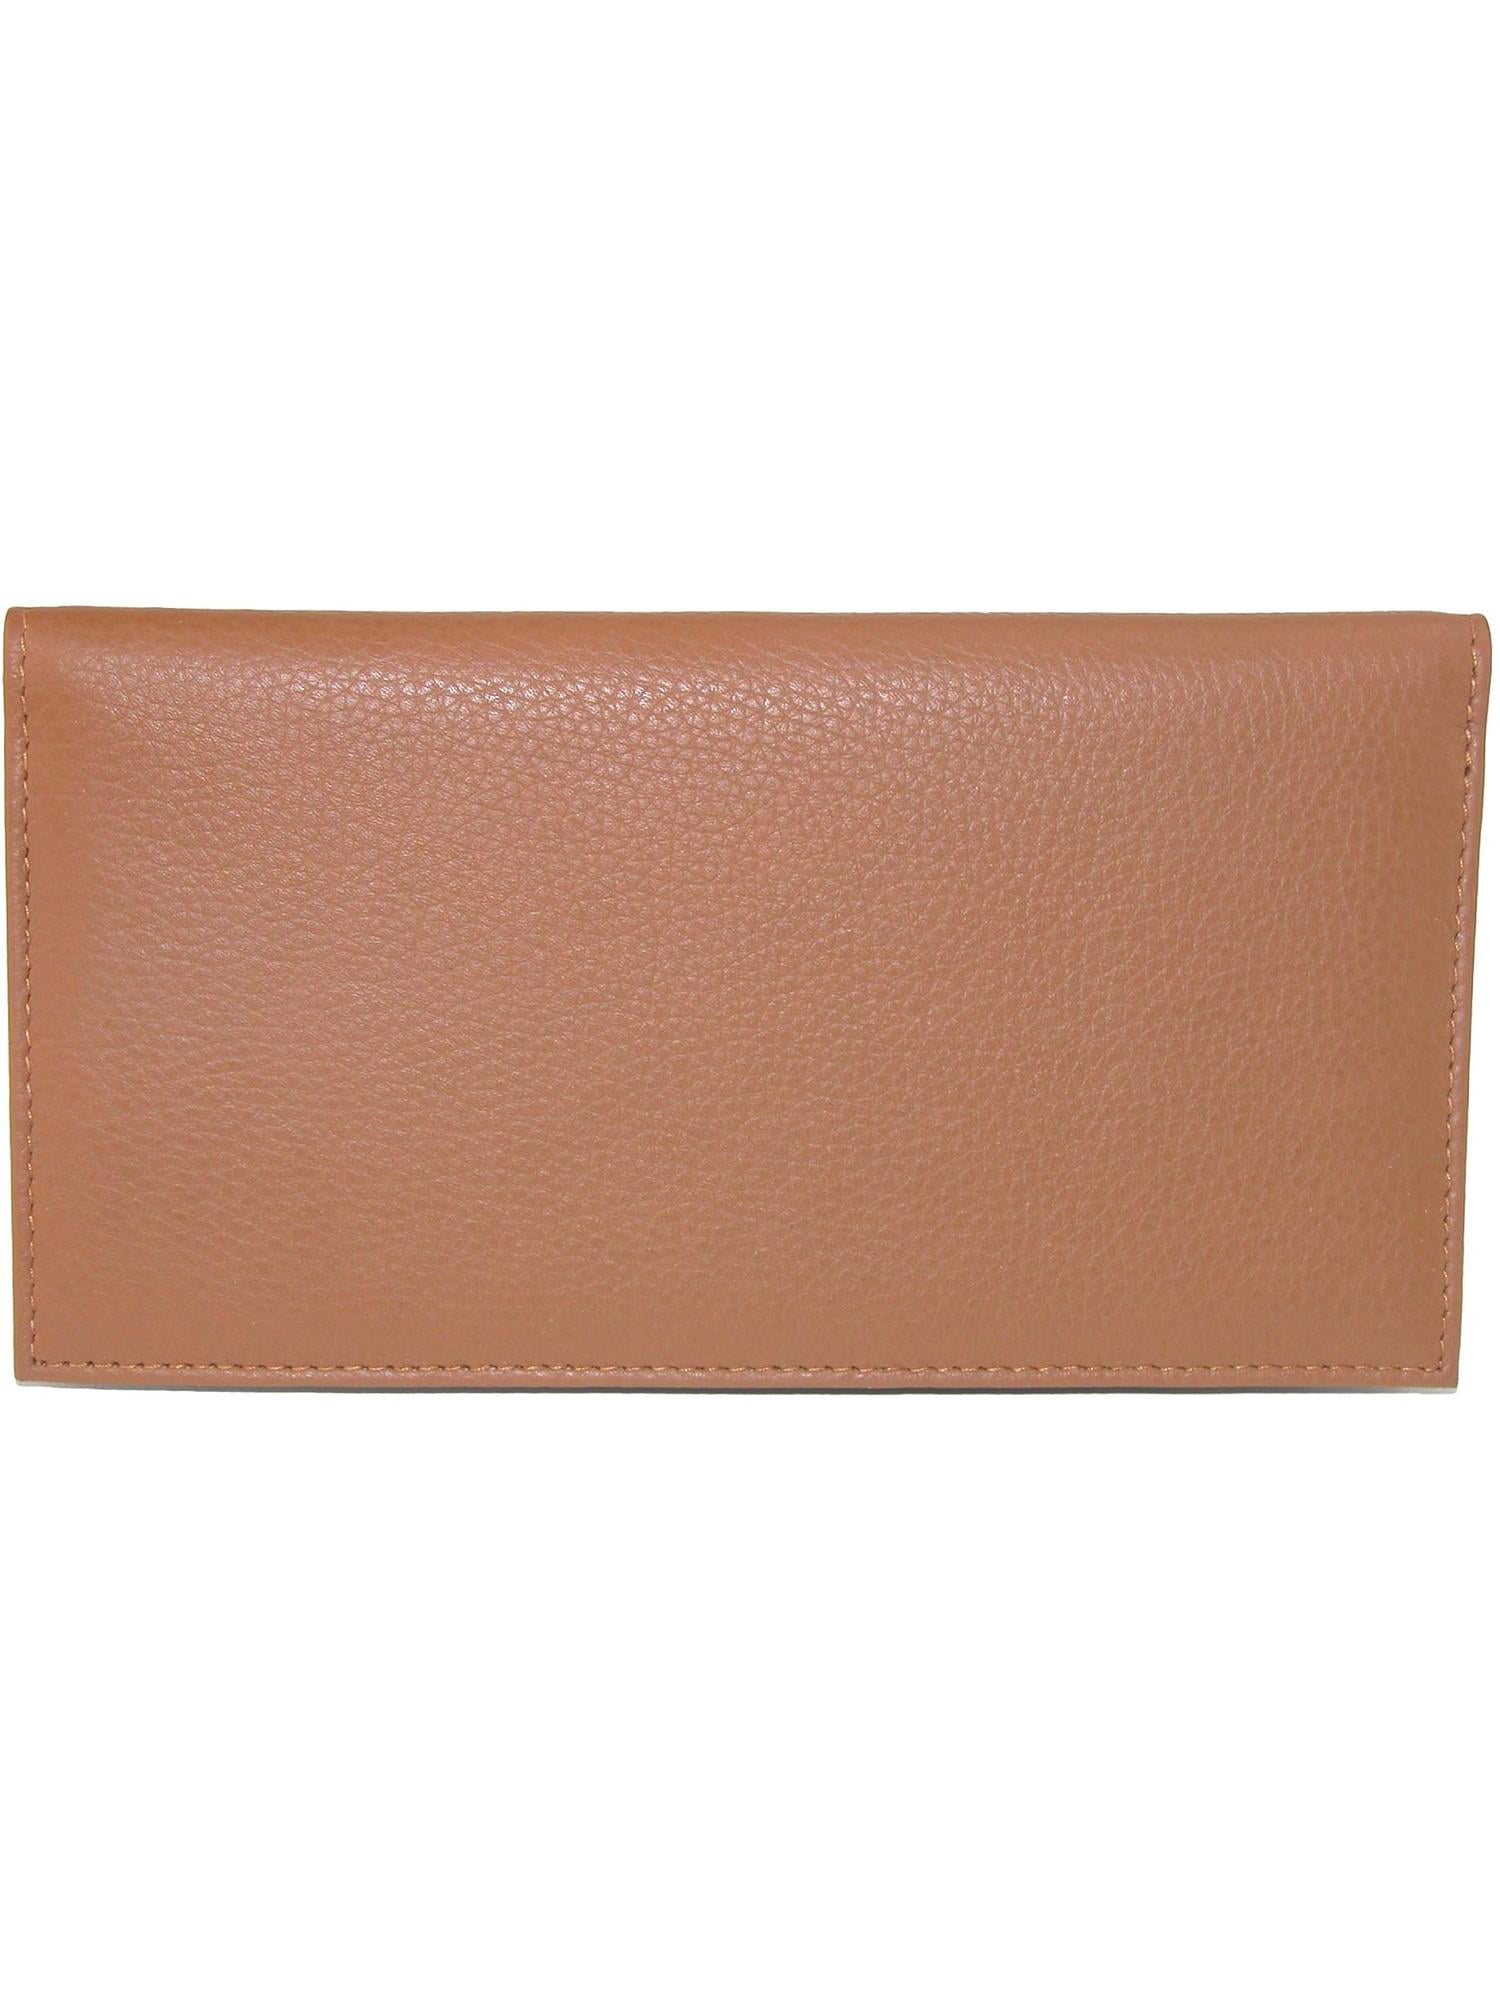 CTM Leather Solid Color Checkbook Cover Customizable 